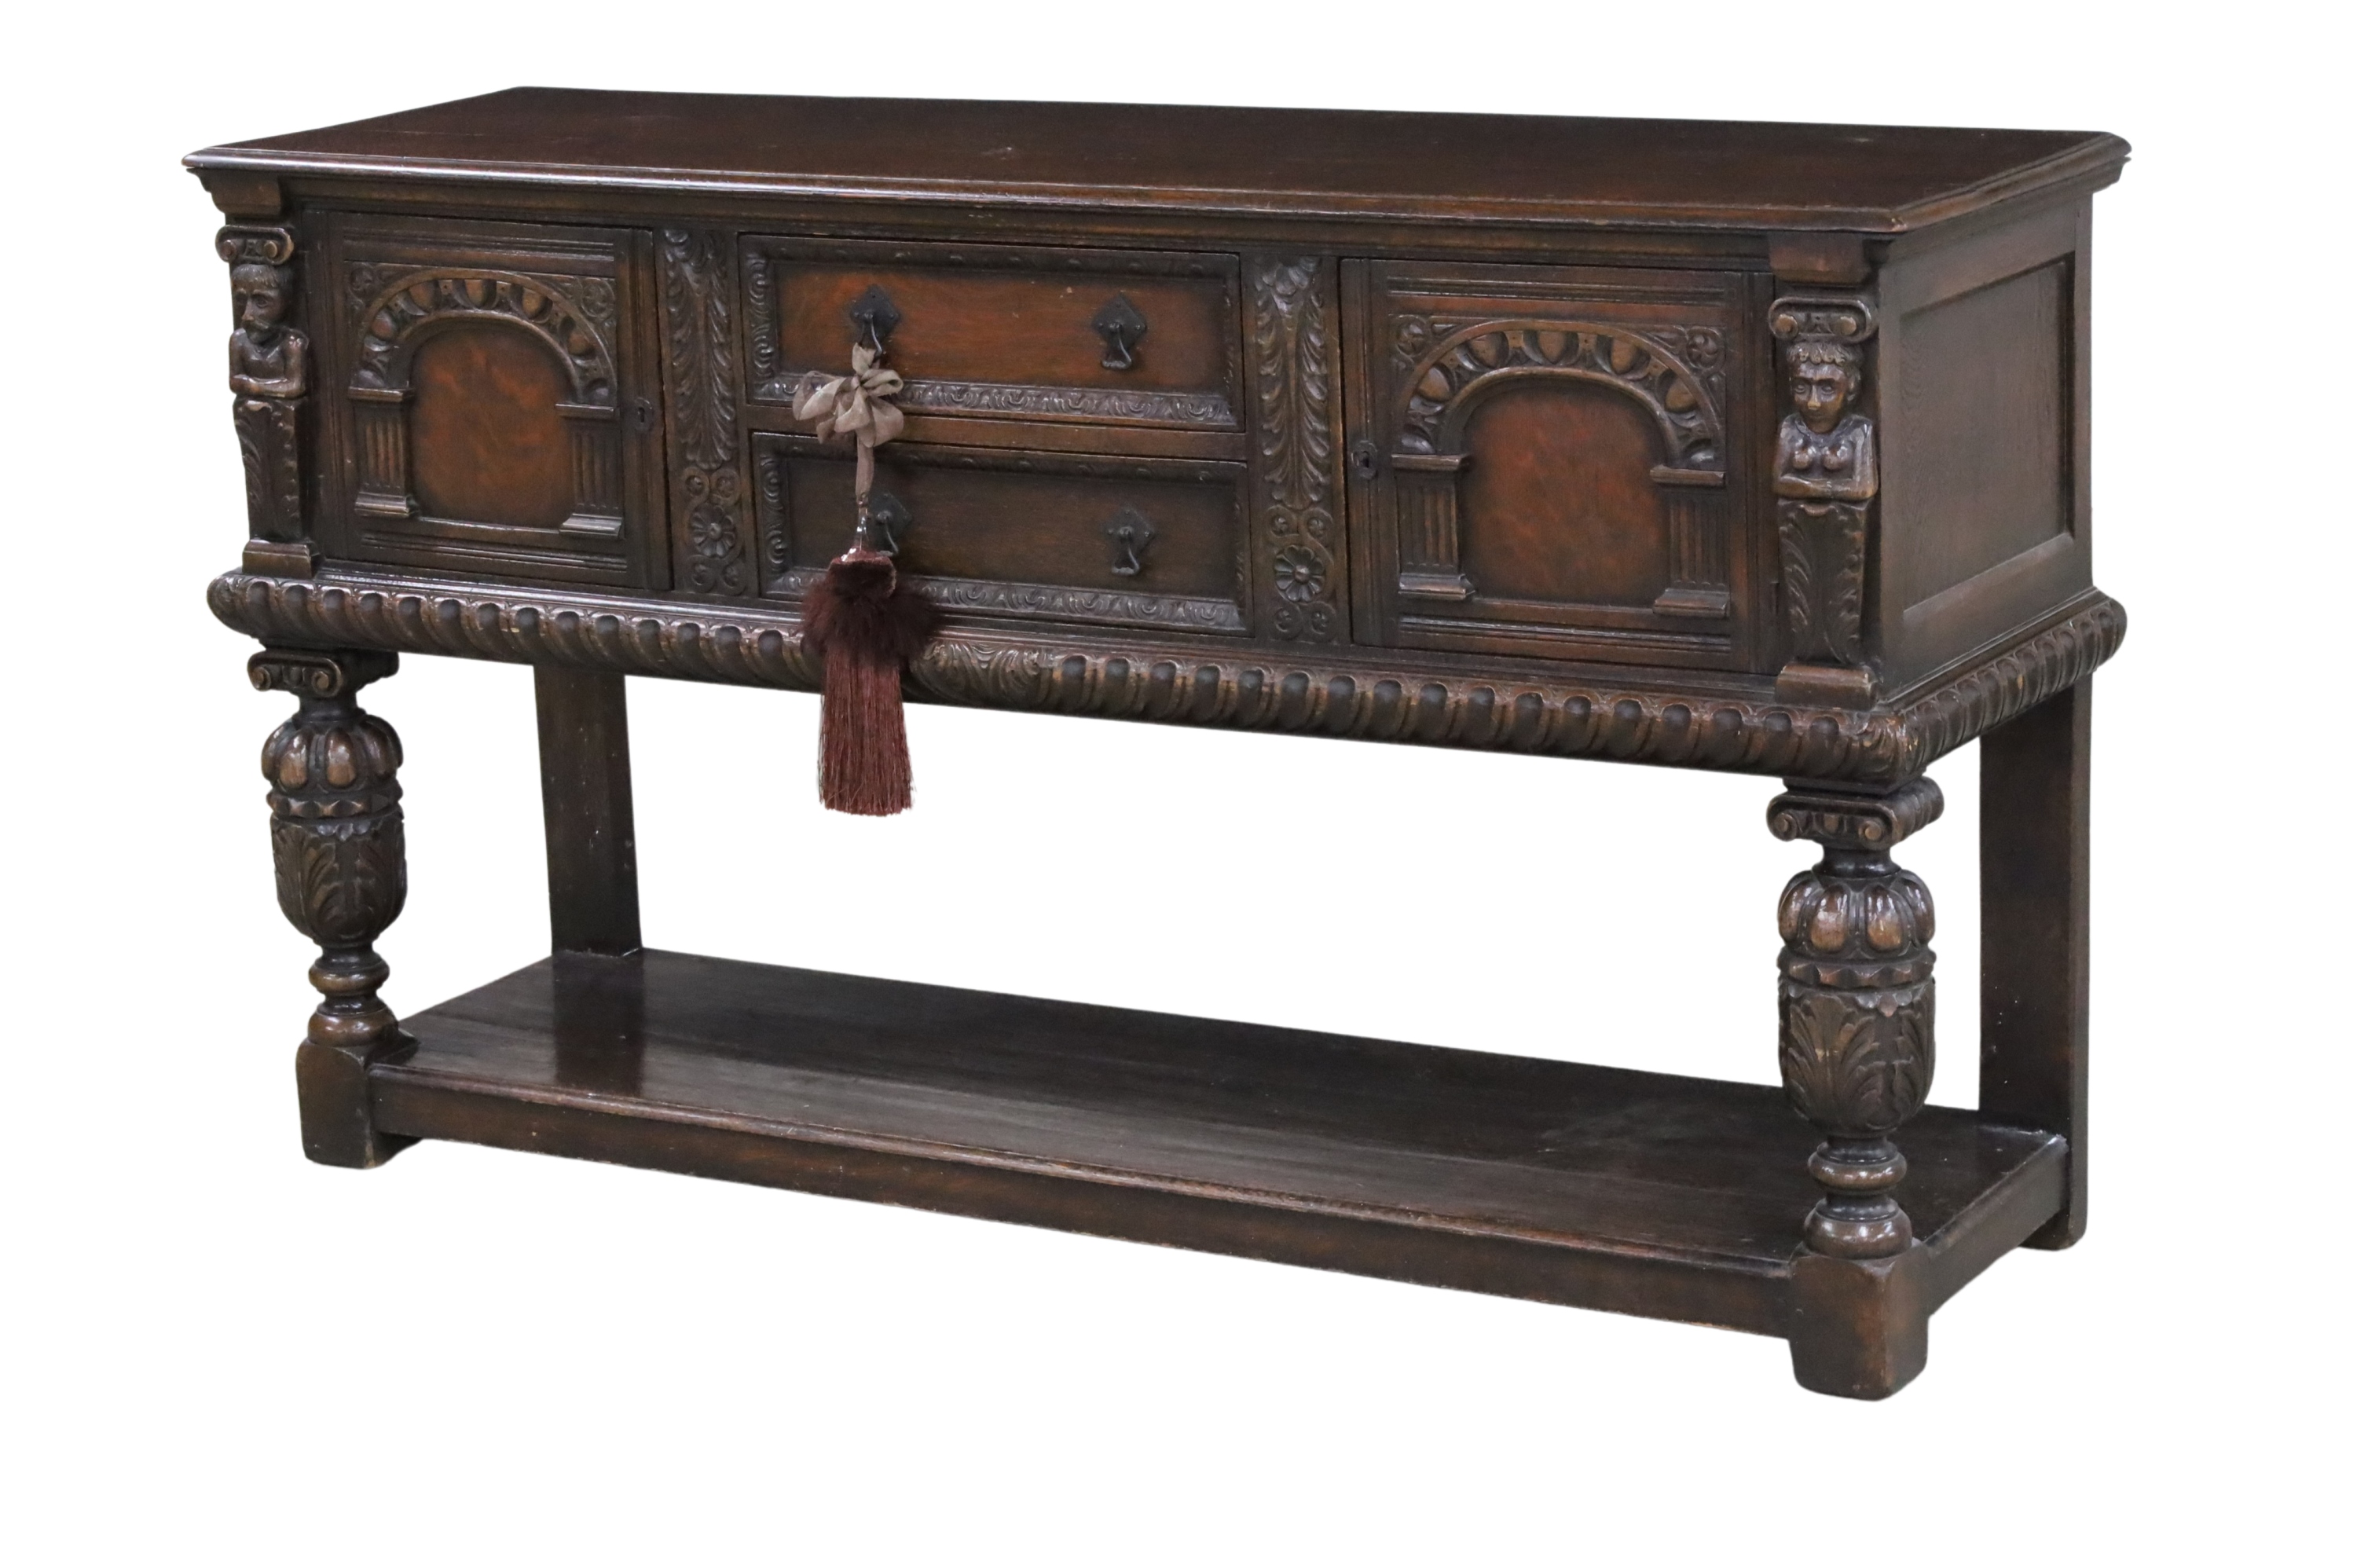 HANDSOME JACOBEAN STYLE OAK CARVED 2f8f0d